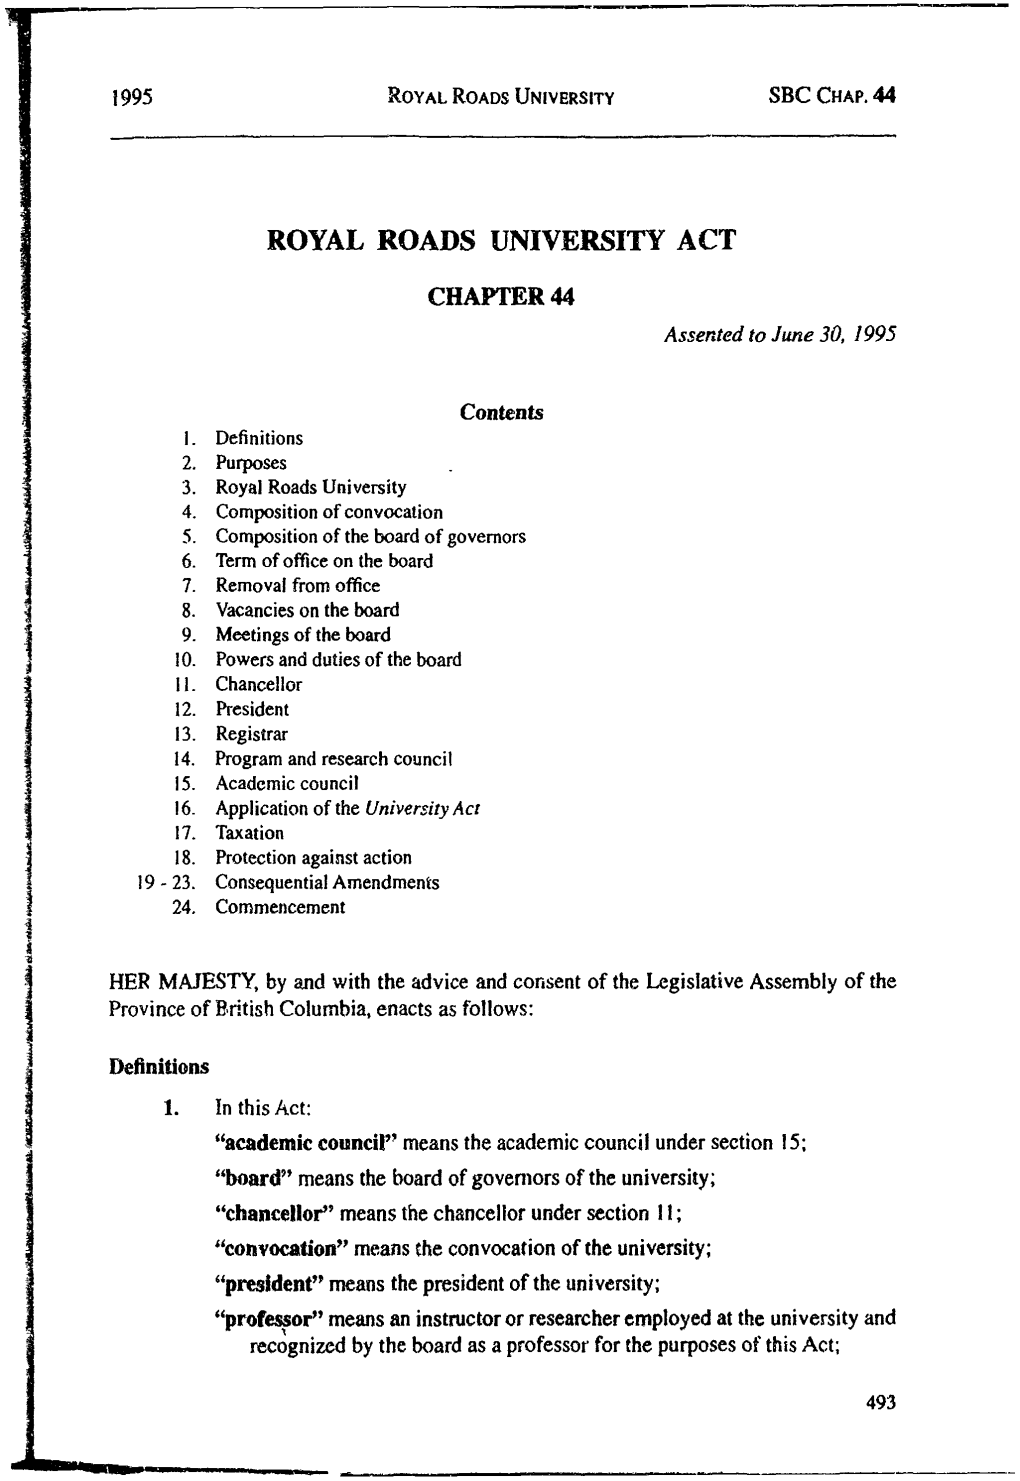 ROYAL ROADS UNIVERSITY ACT CHAPTER 44 Assented to June 30, 1995